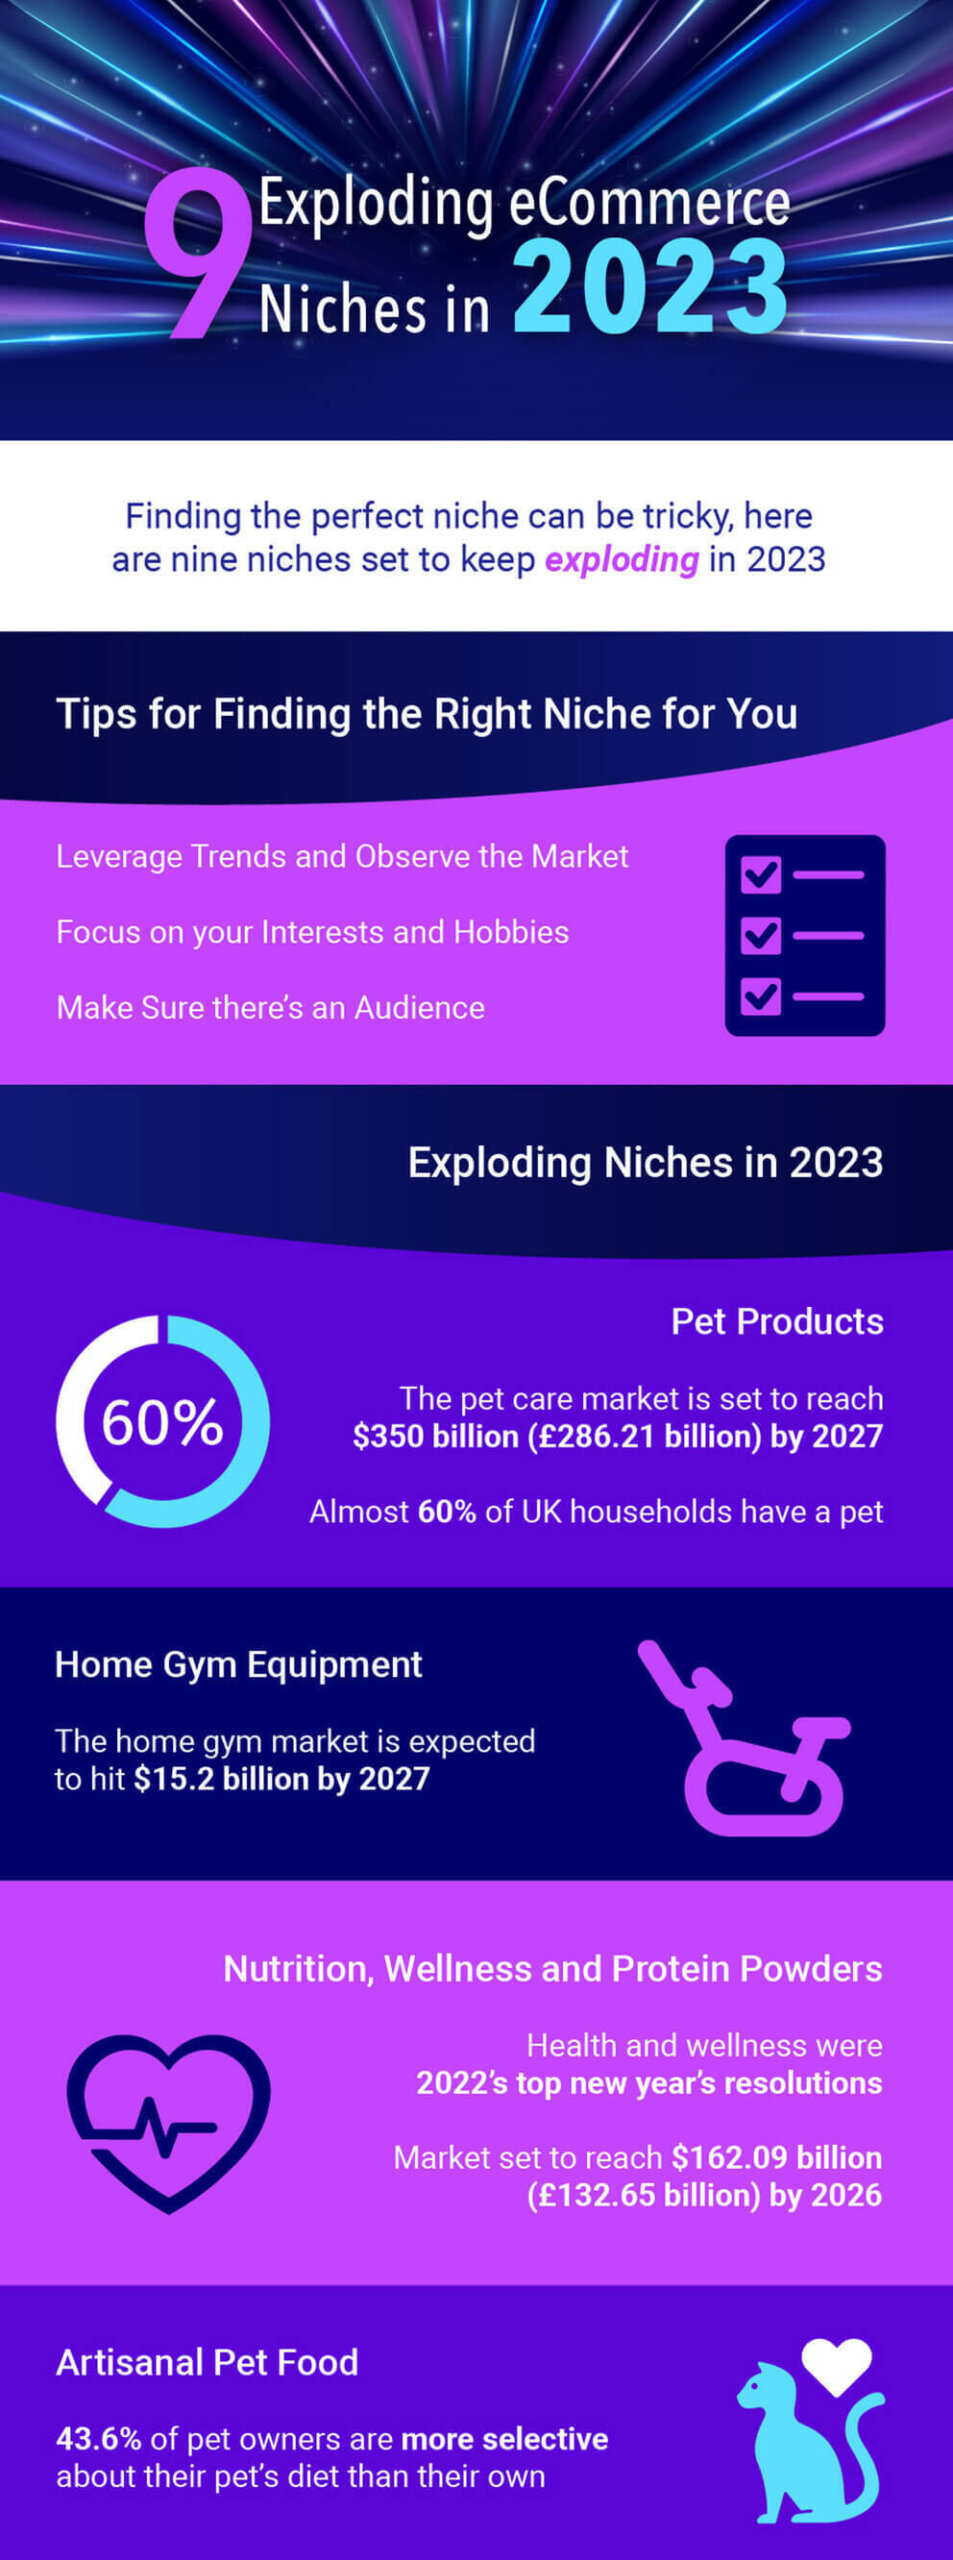 eCommerce Niches in 2023